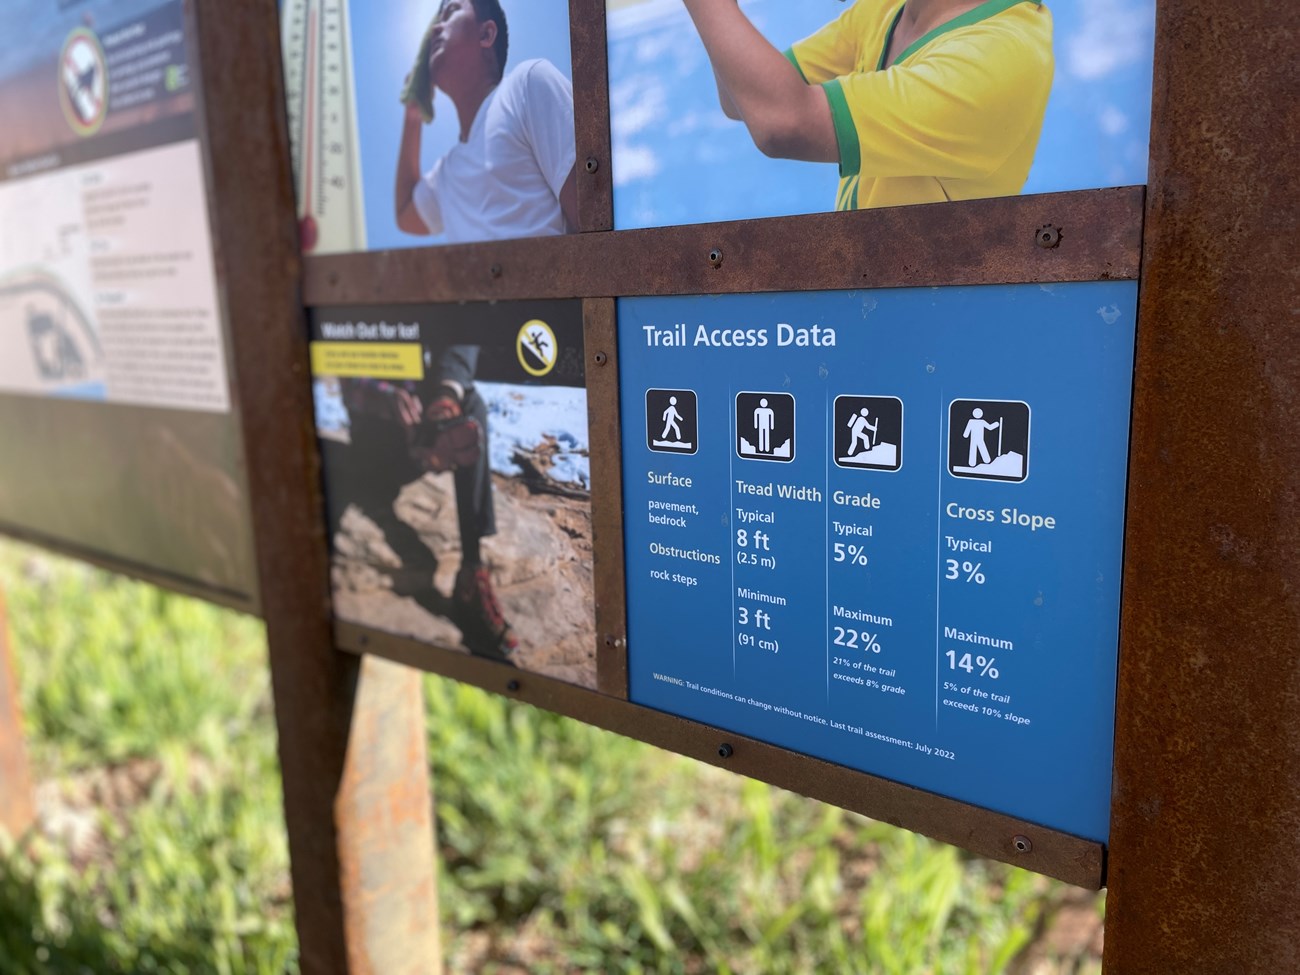 white text on a blue sign reading: Trail Access Data, with pictograms and data for Surface, Grade, Width, Cross-Slope